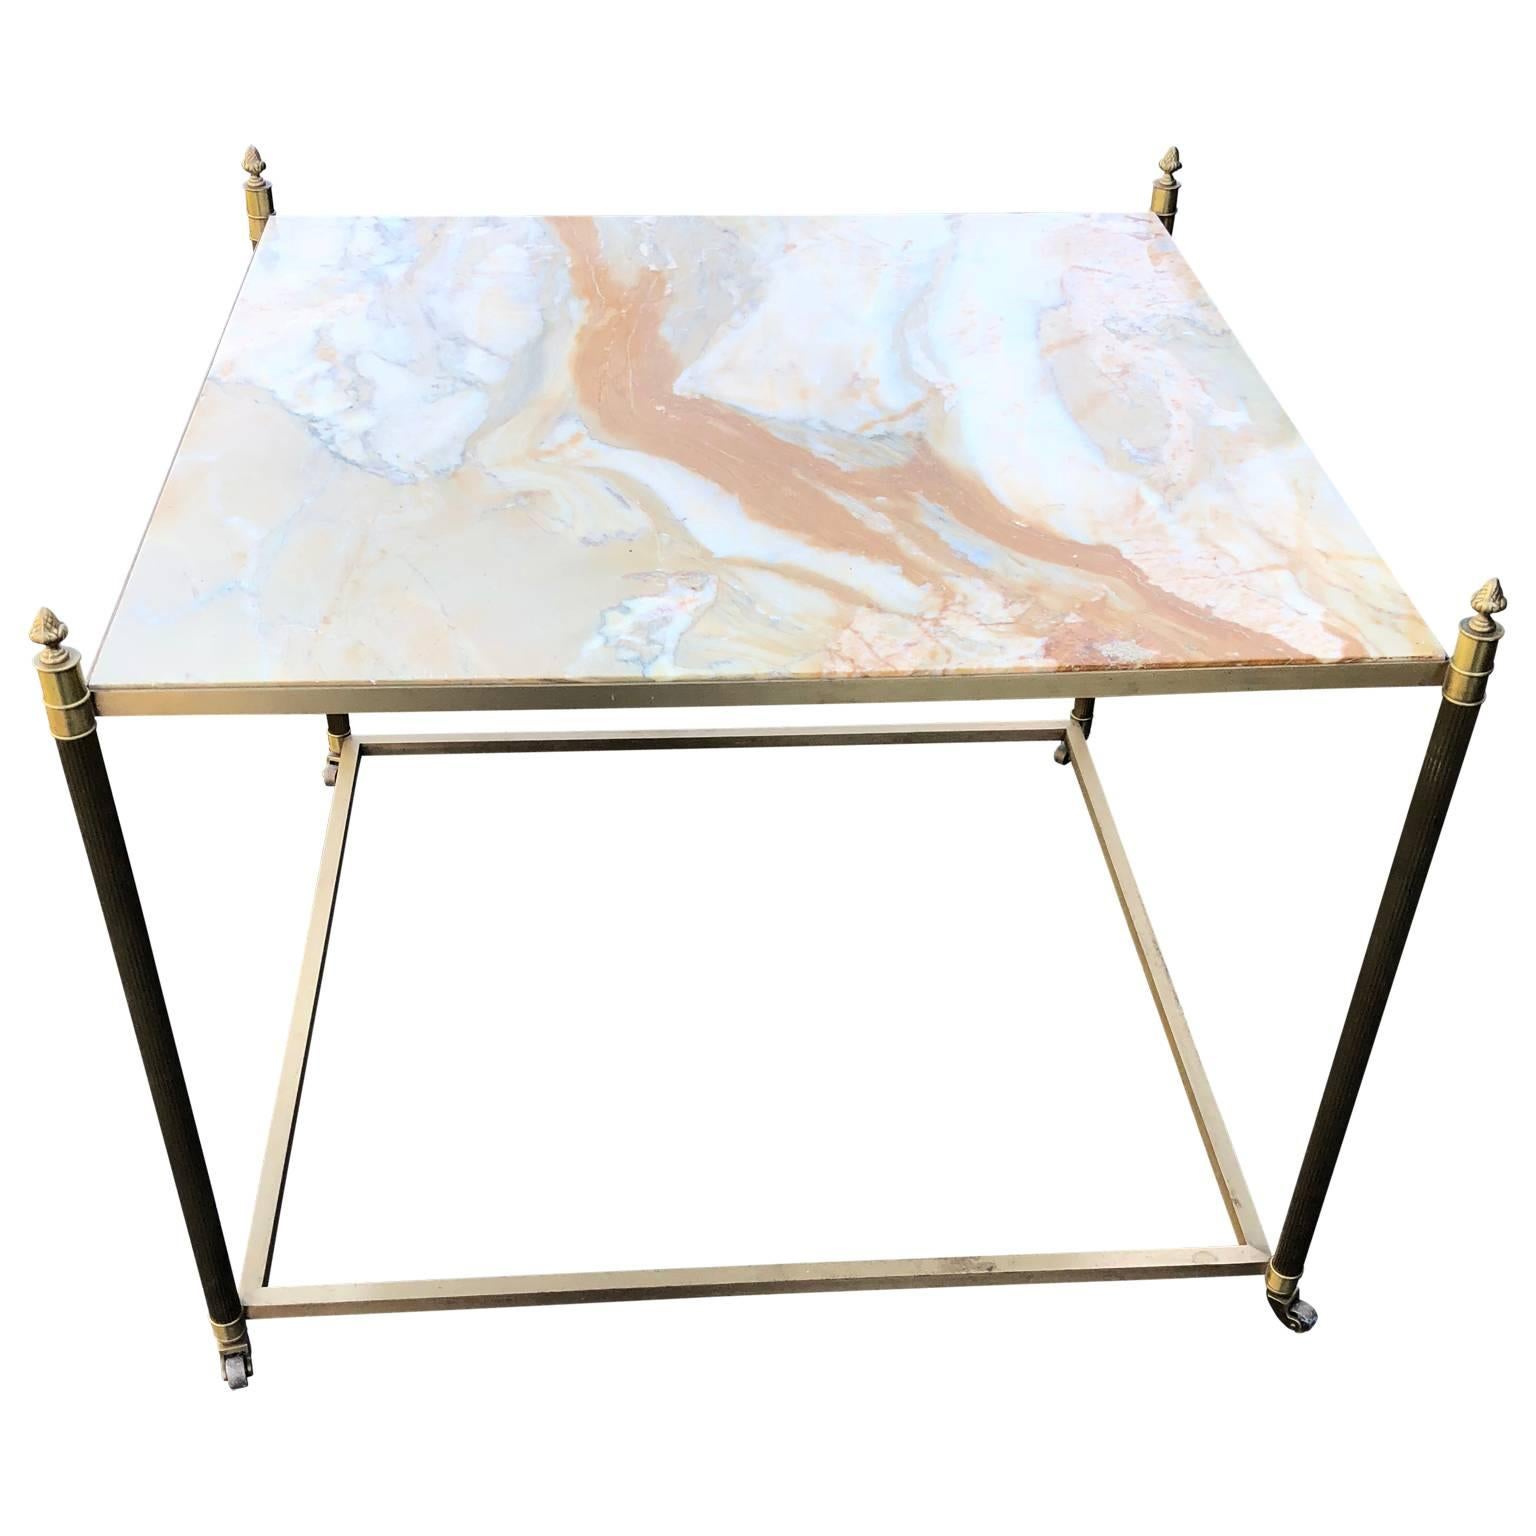 Neoclassical Large Square Onyx and Brass Coffee, Sofa or Cocktail Table by Maison Bagués For Sale